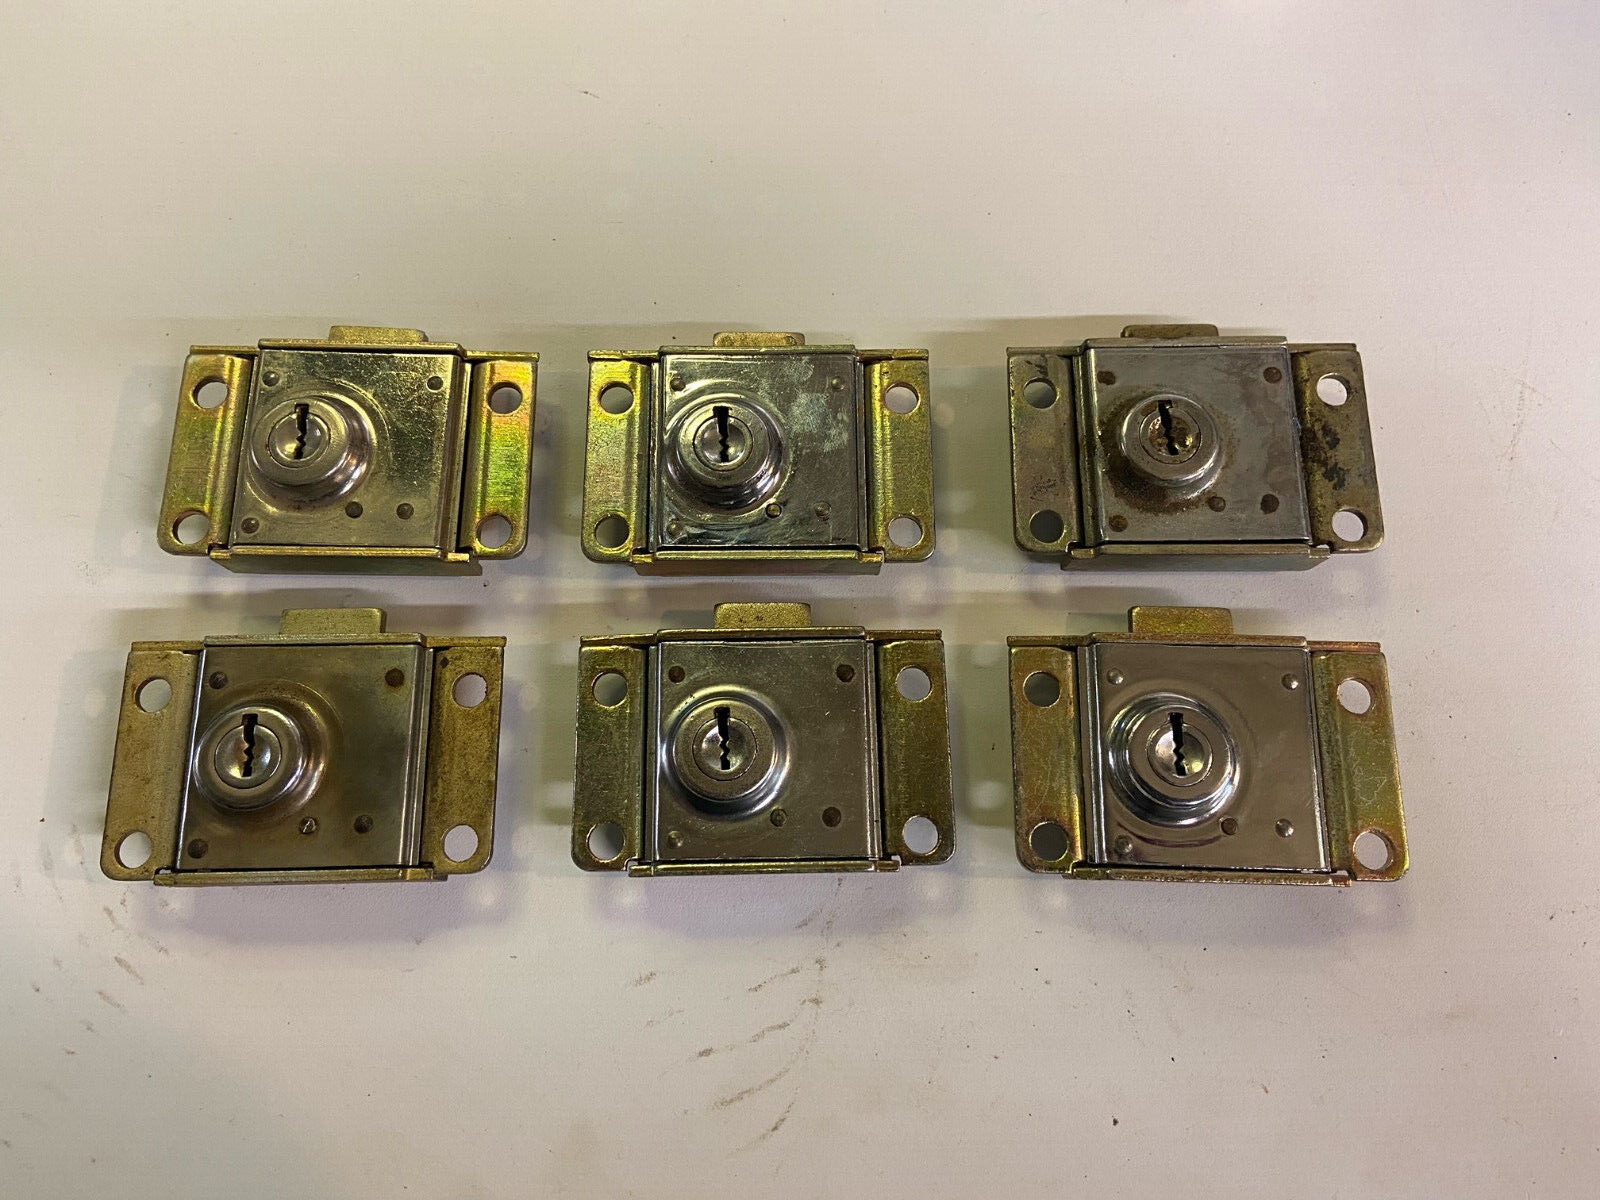 Lot of 6 Western Electric 29A Single Slot Payphone Locks Bell System Pay Phone